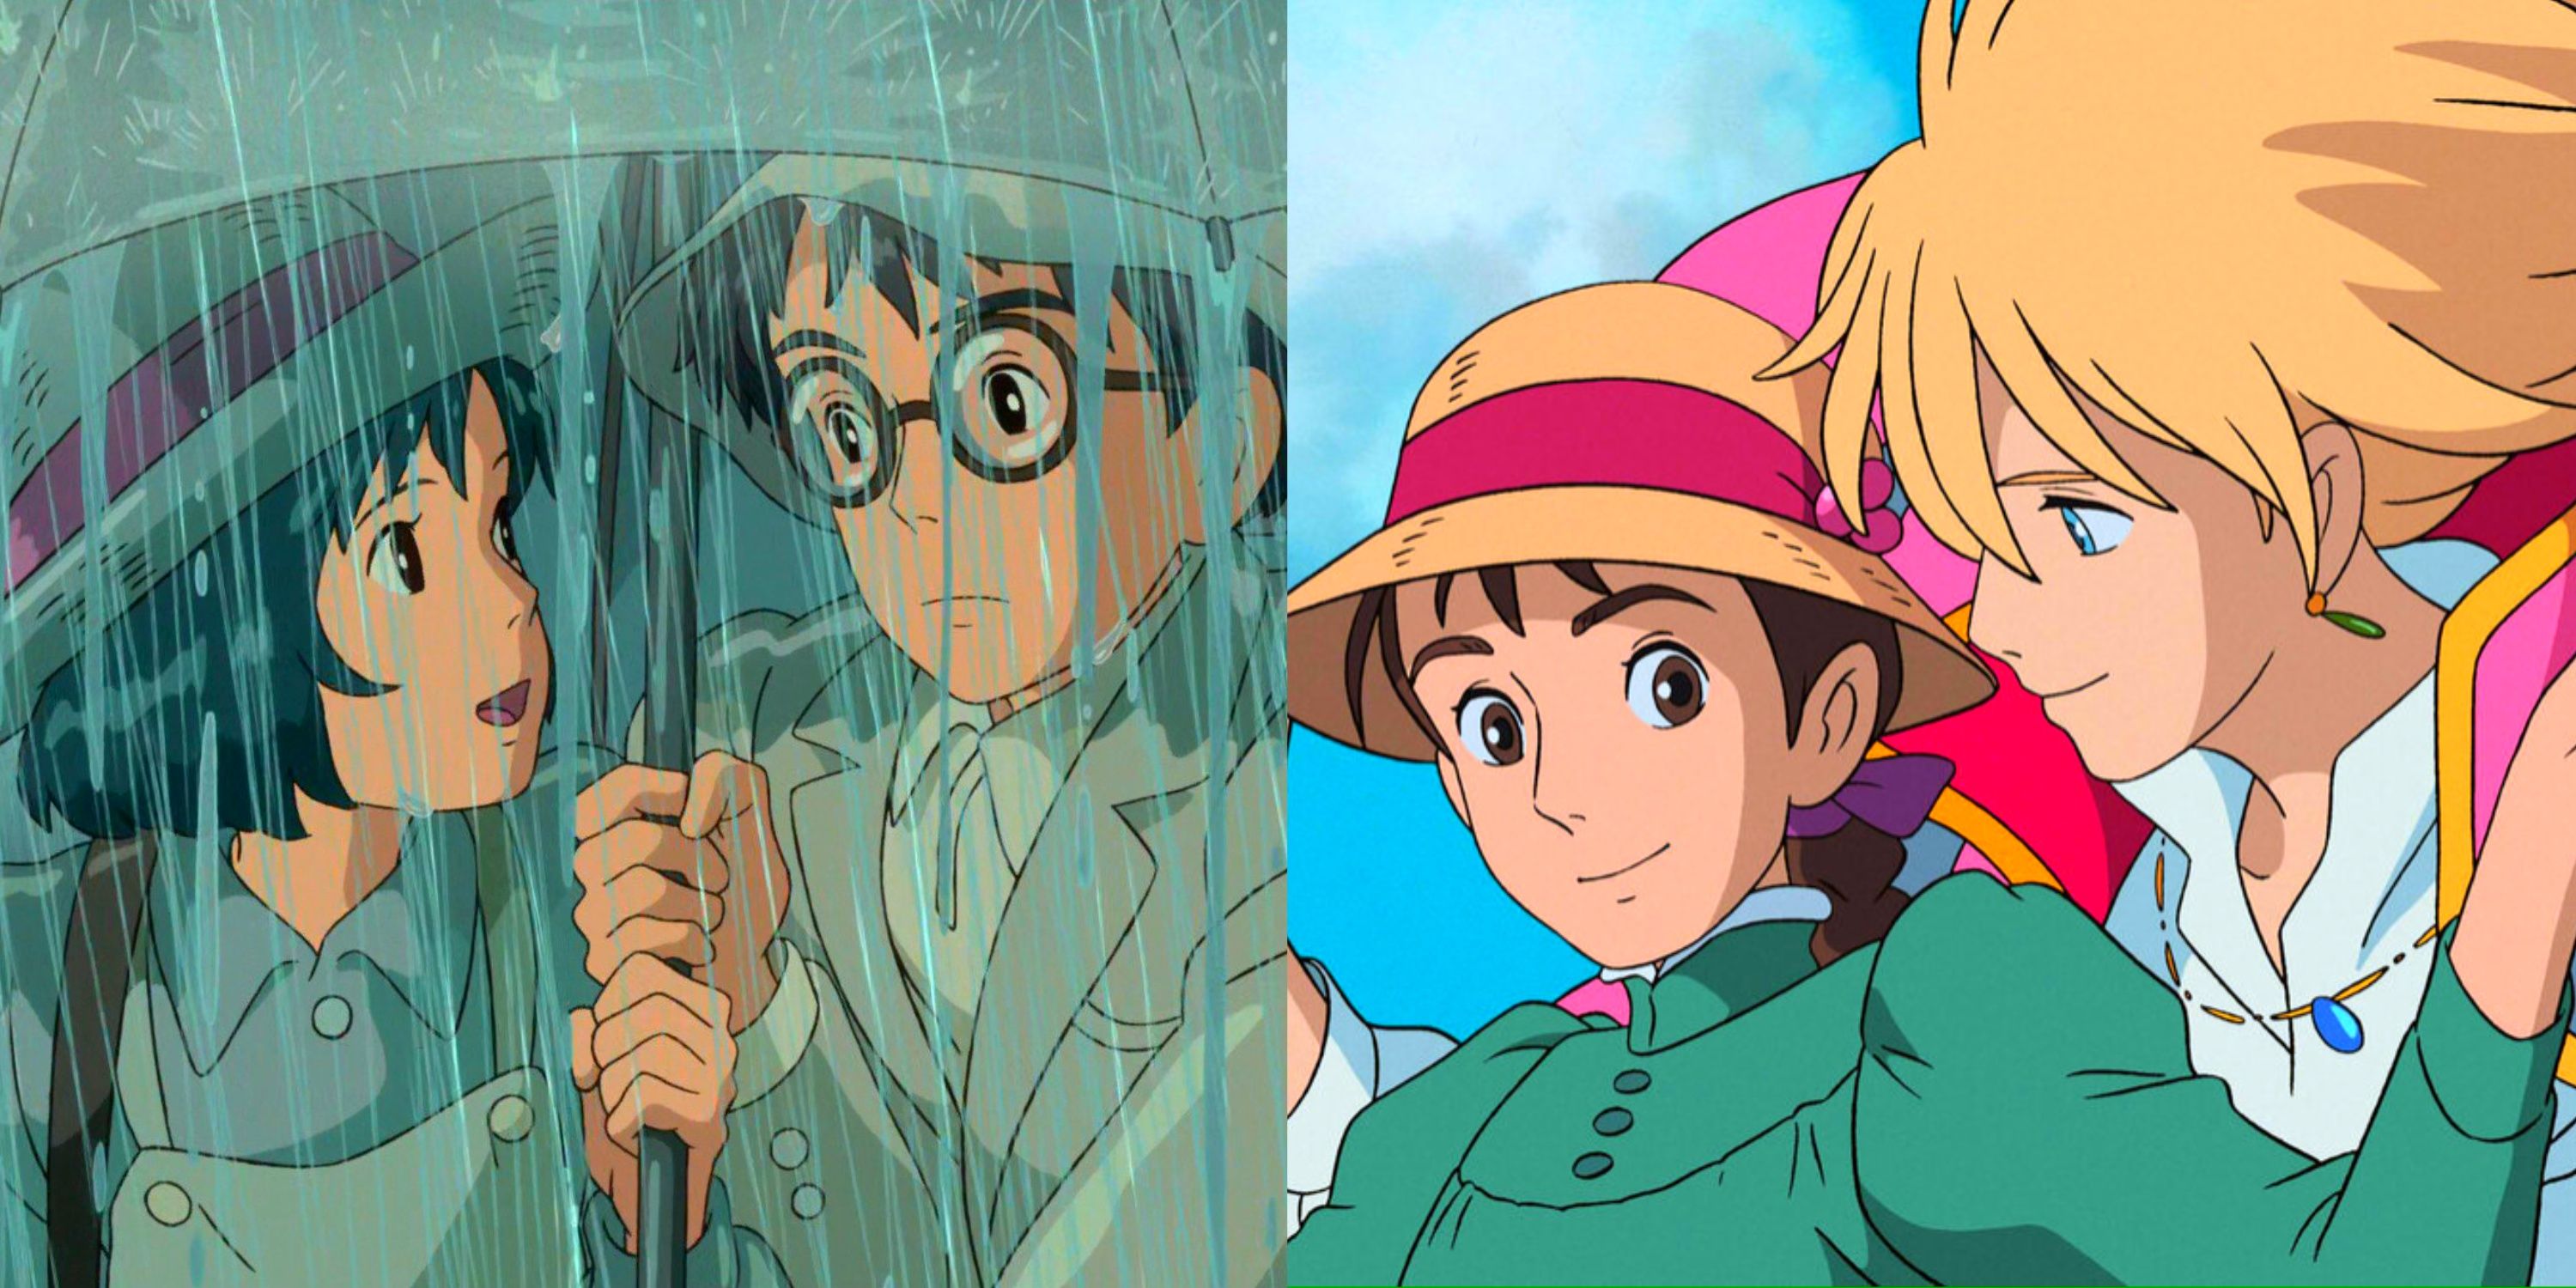 Split image of Jro and Naoko in the rain in The Wind Rises, and Howl and Sophie in Howl's Moving Castle